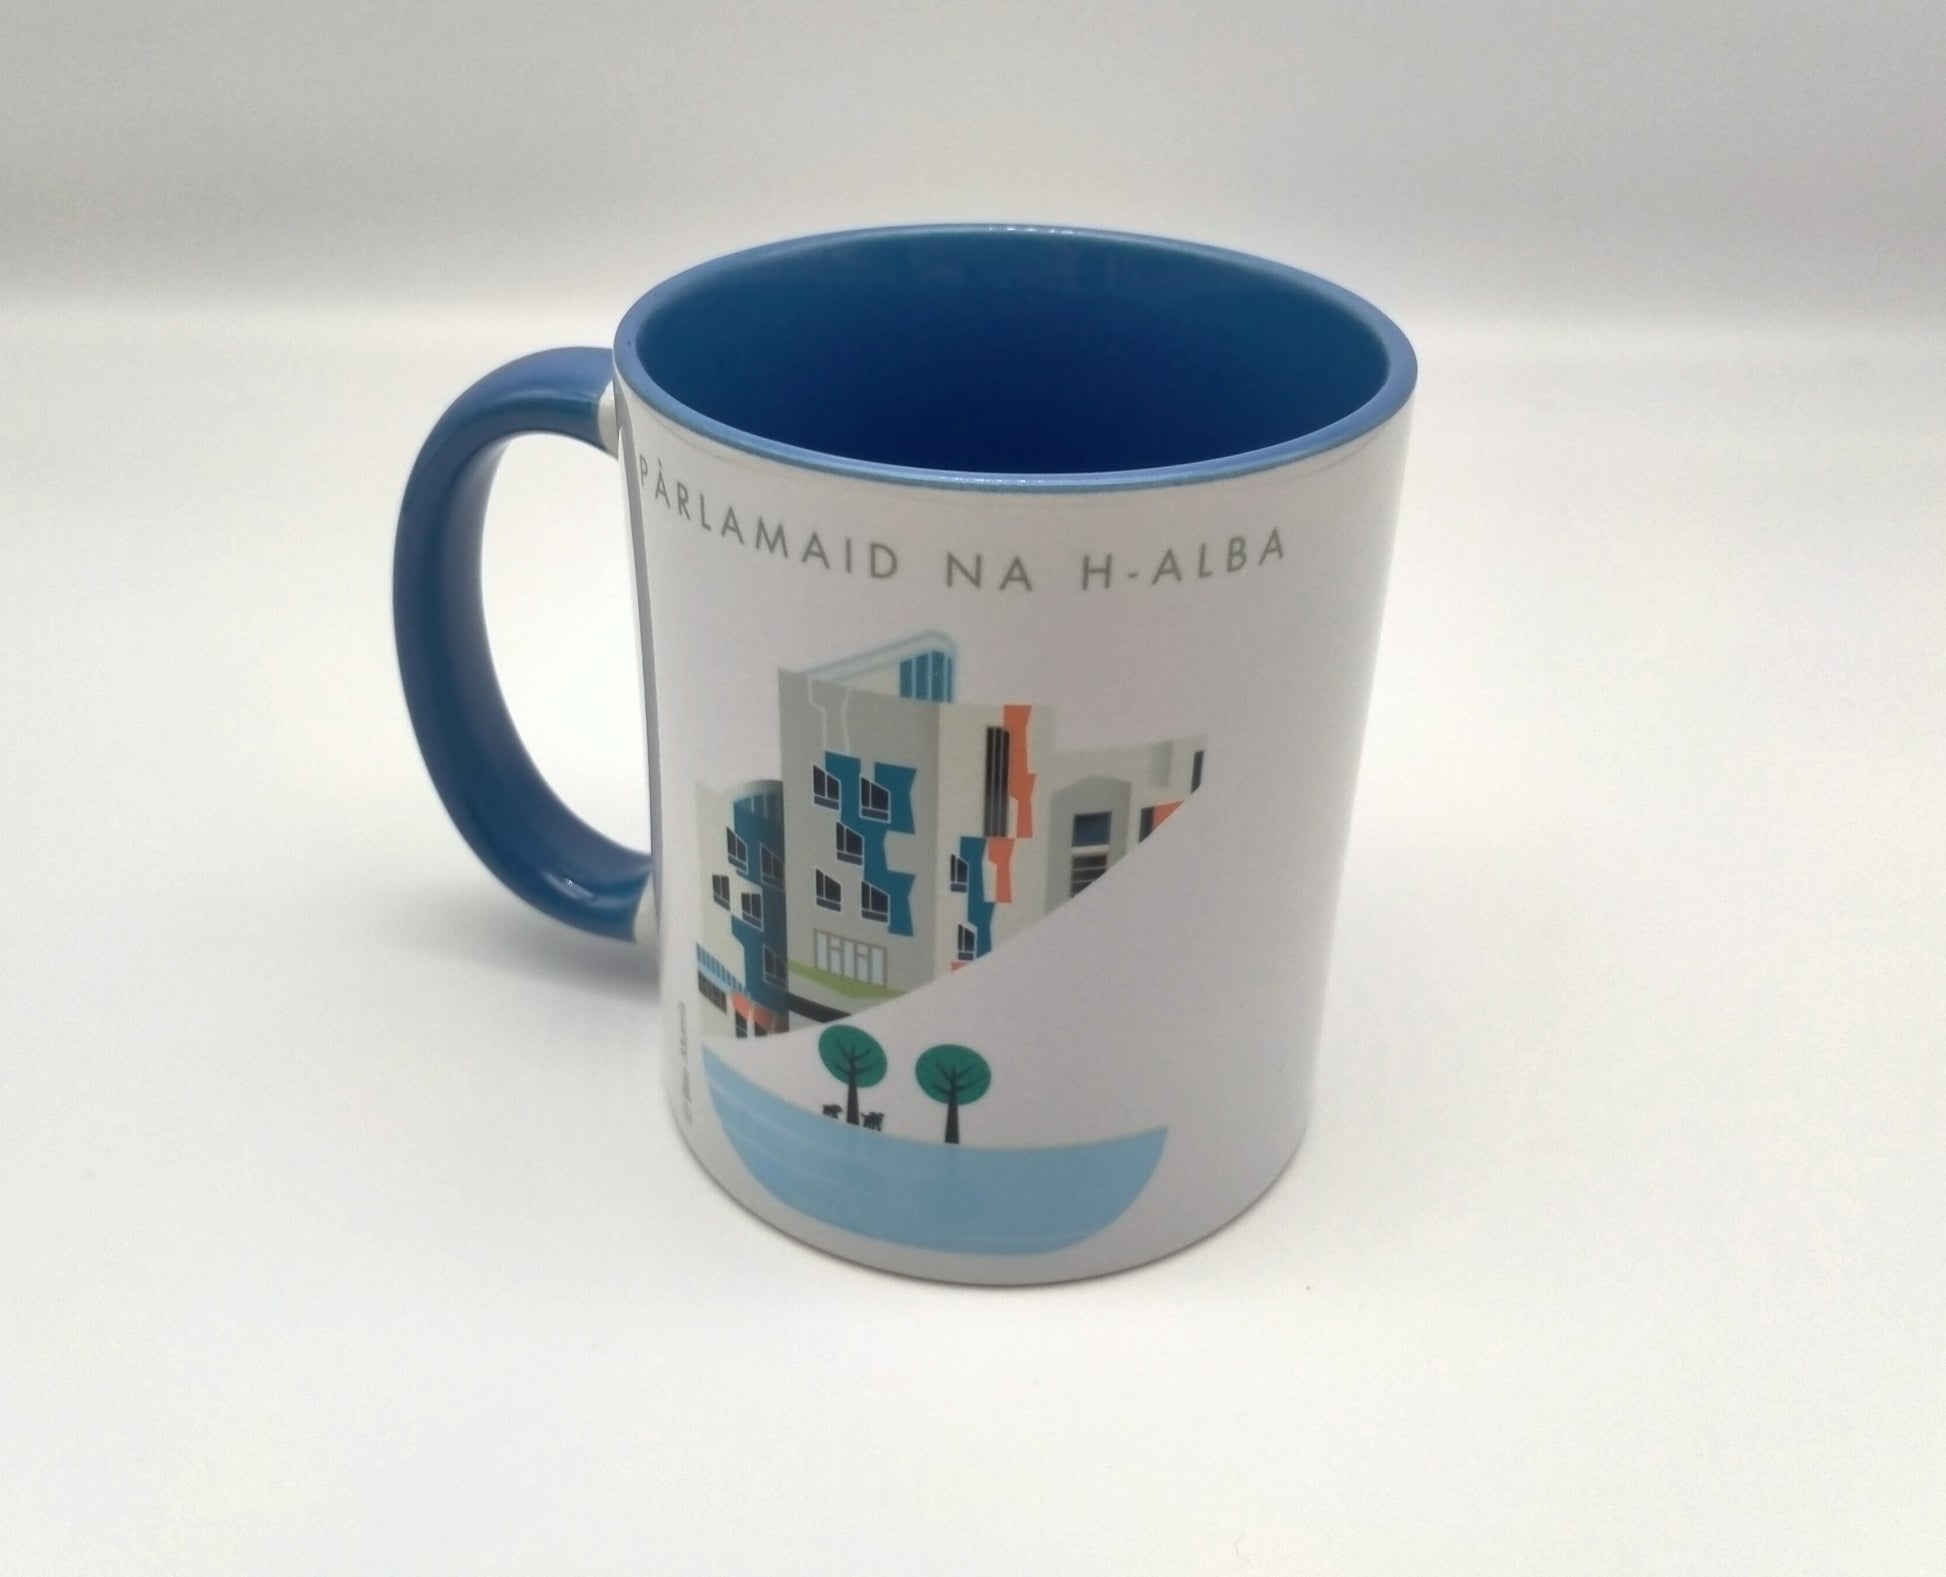 The other side of the mug with the image and writting in Gaelic. 